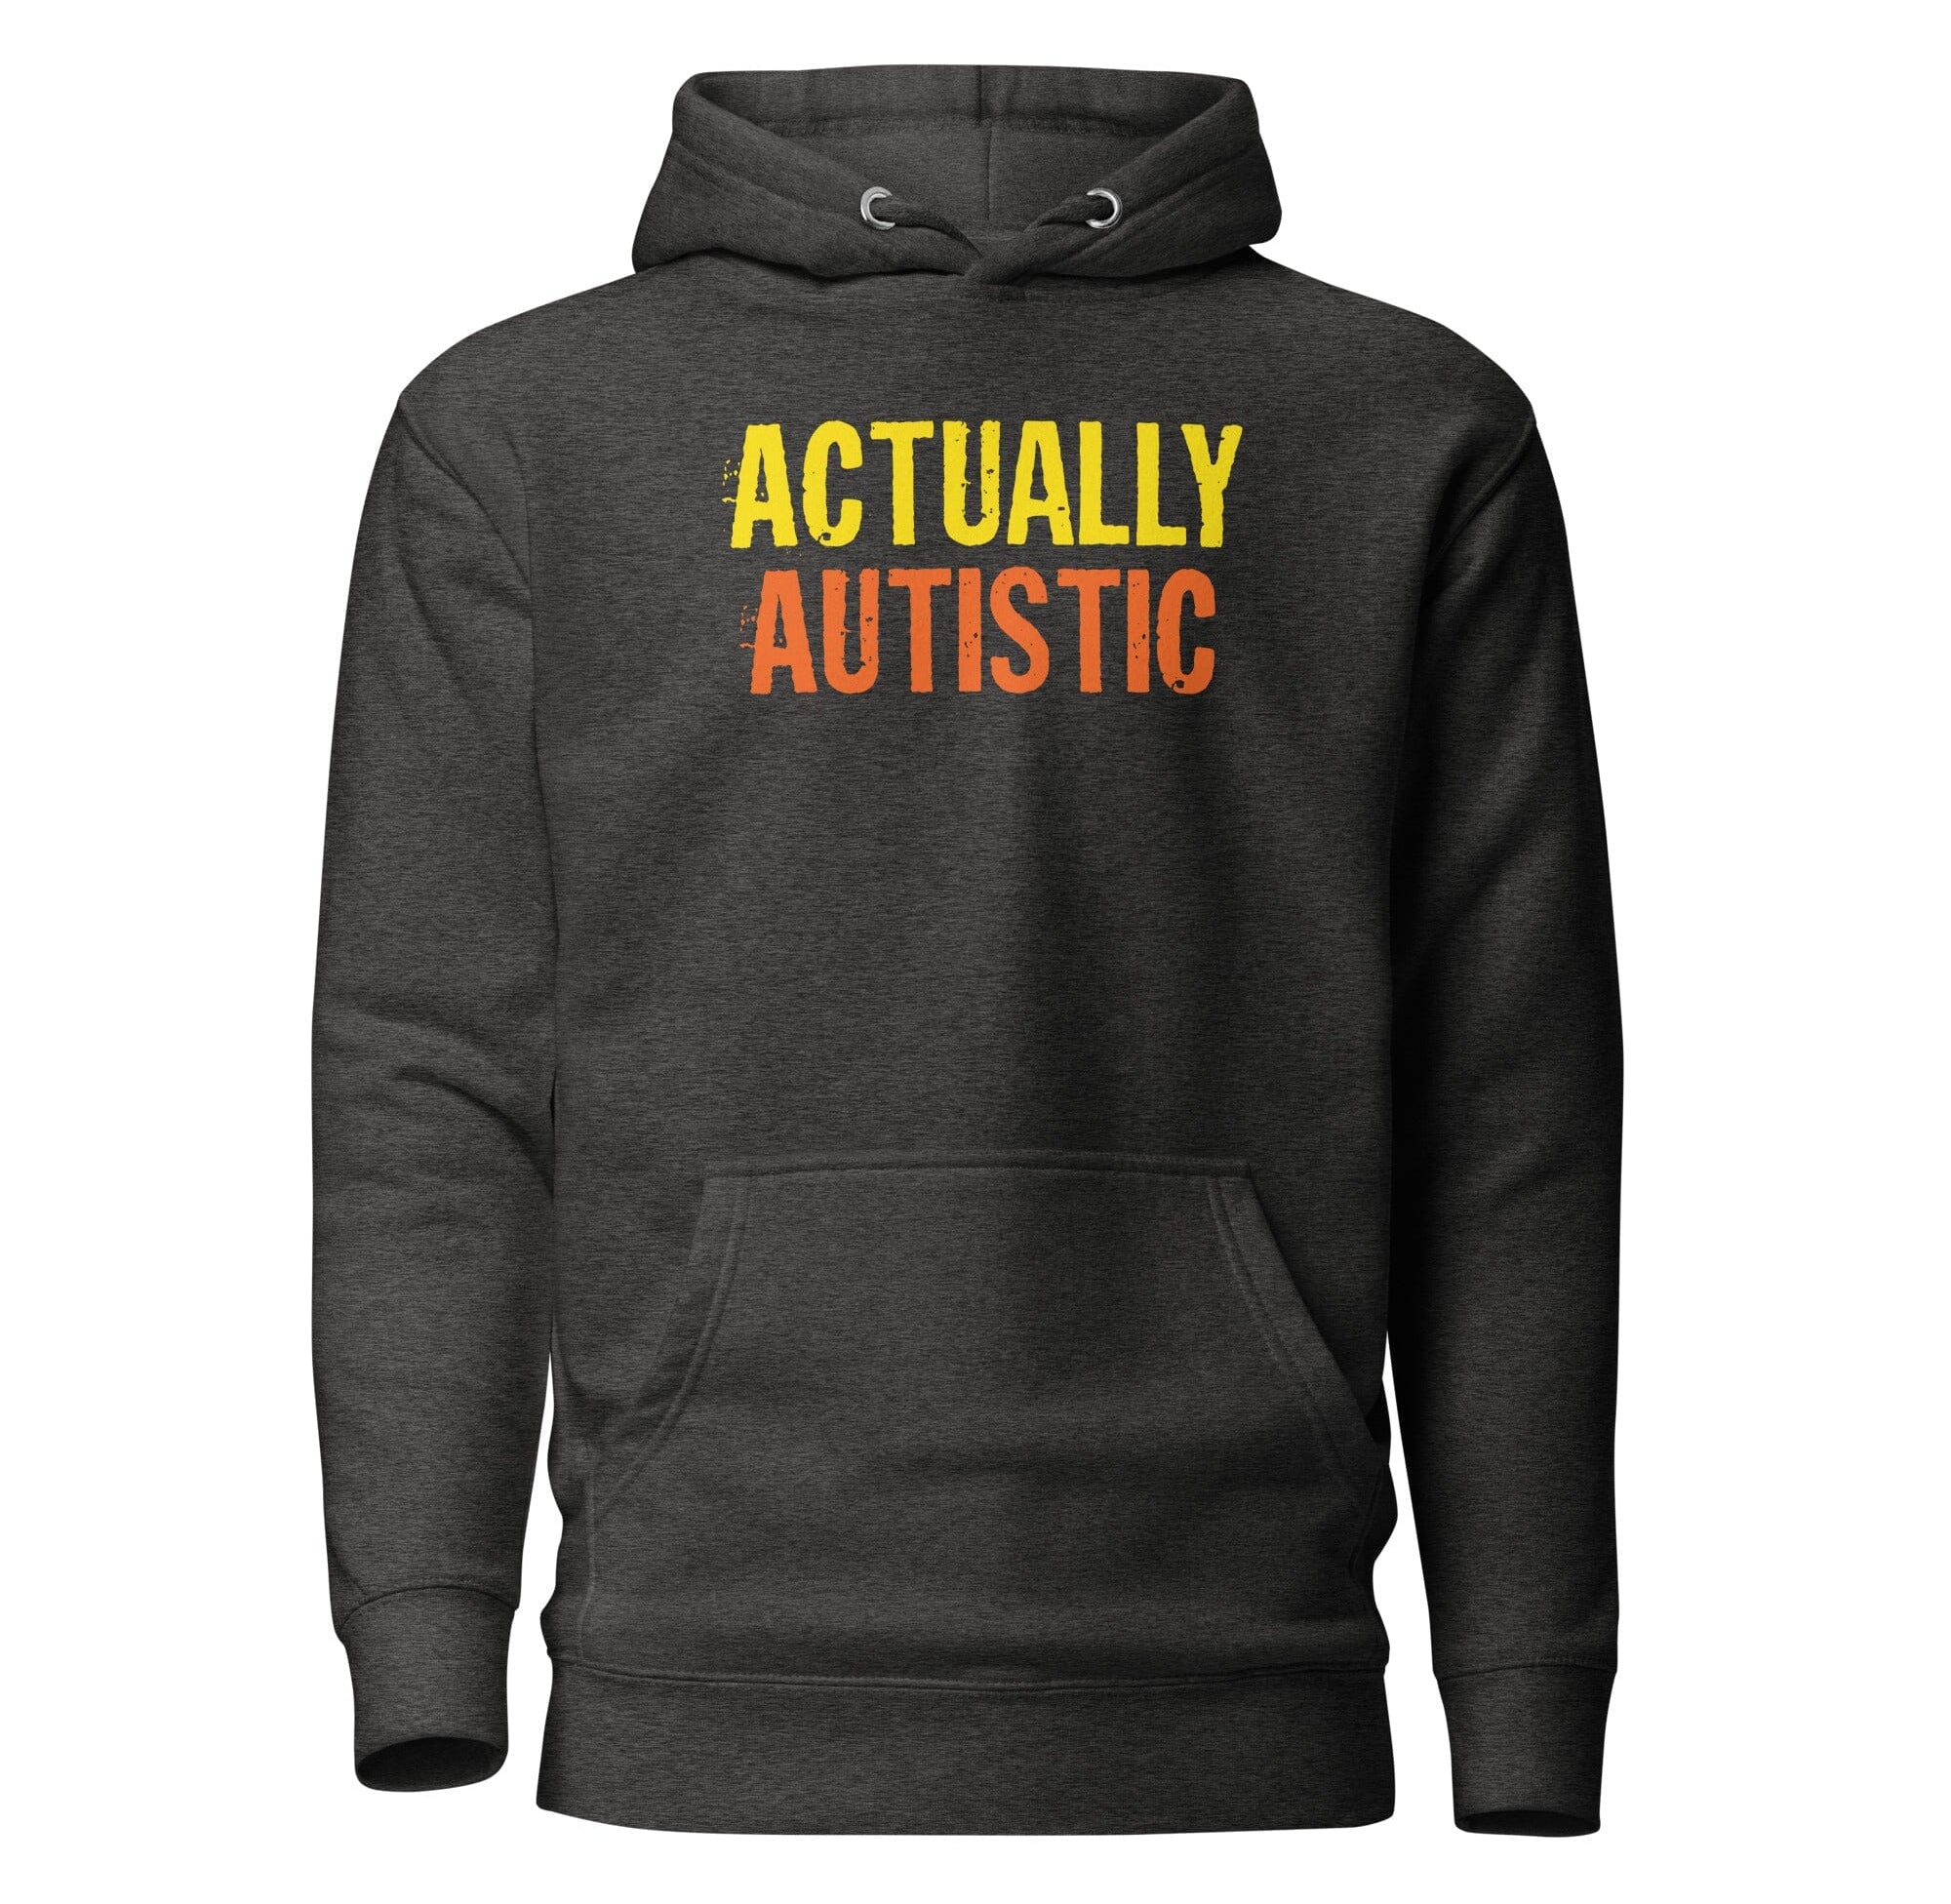 Actually Autistic Unisex Hoodie The Autistic Innovator Charcoal Heather S 